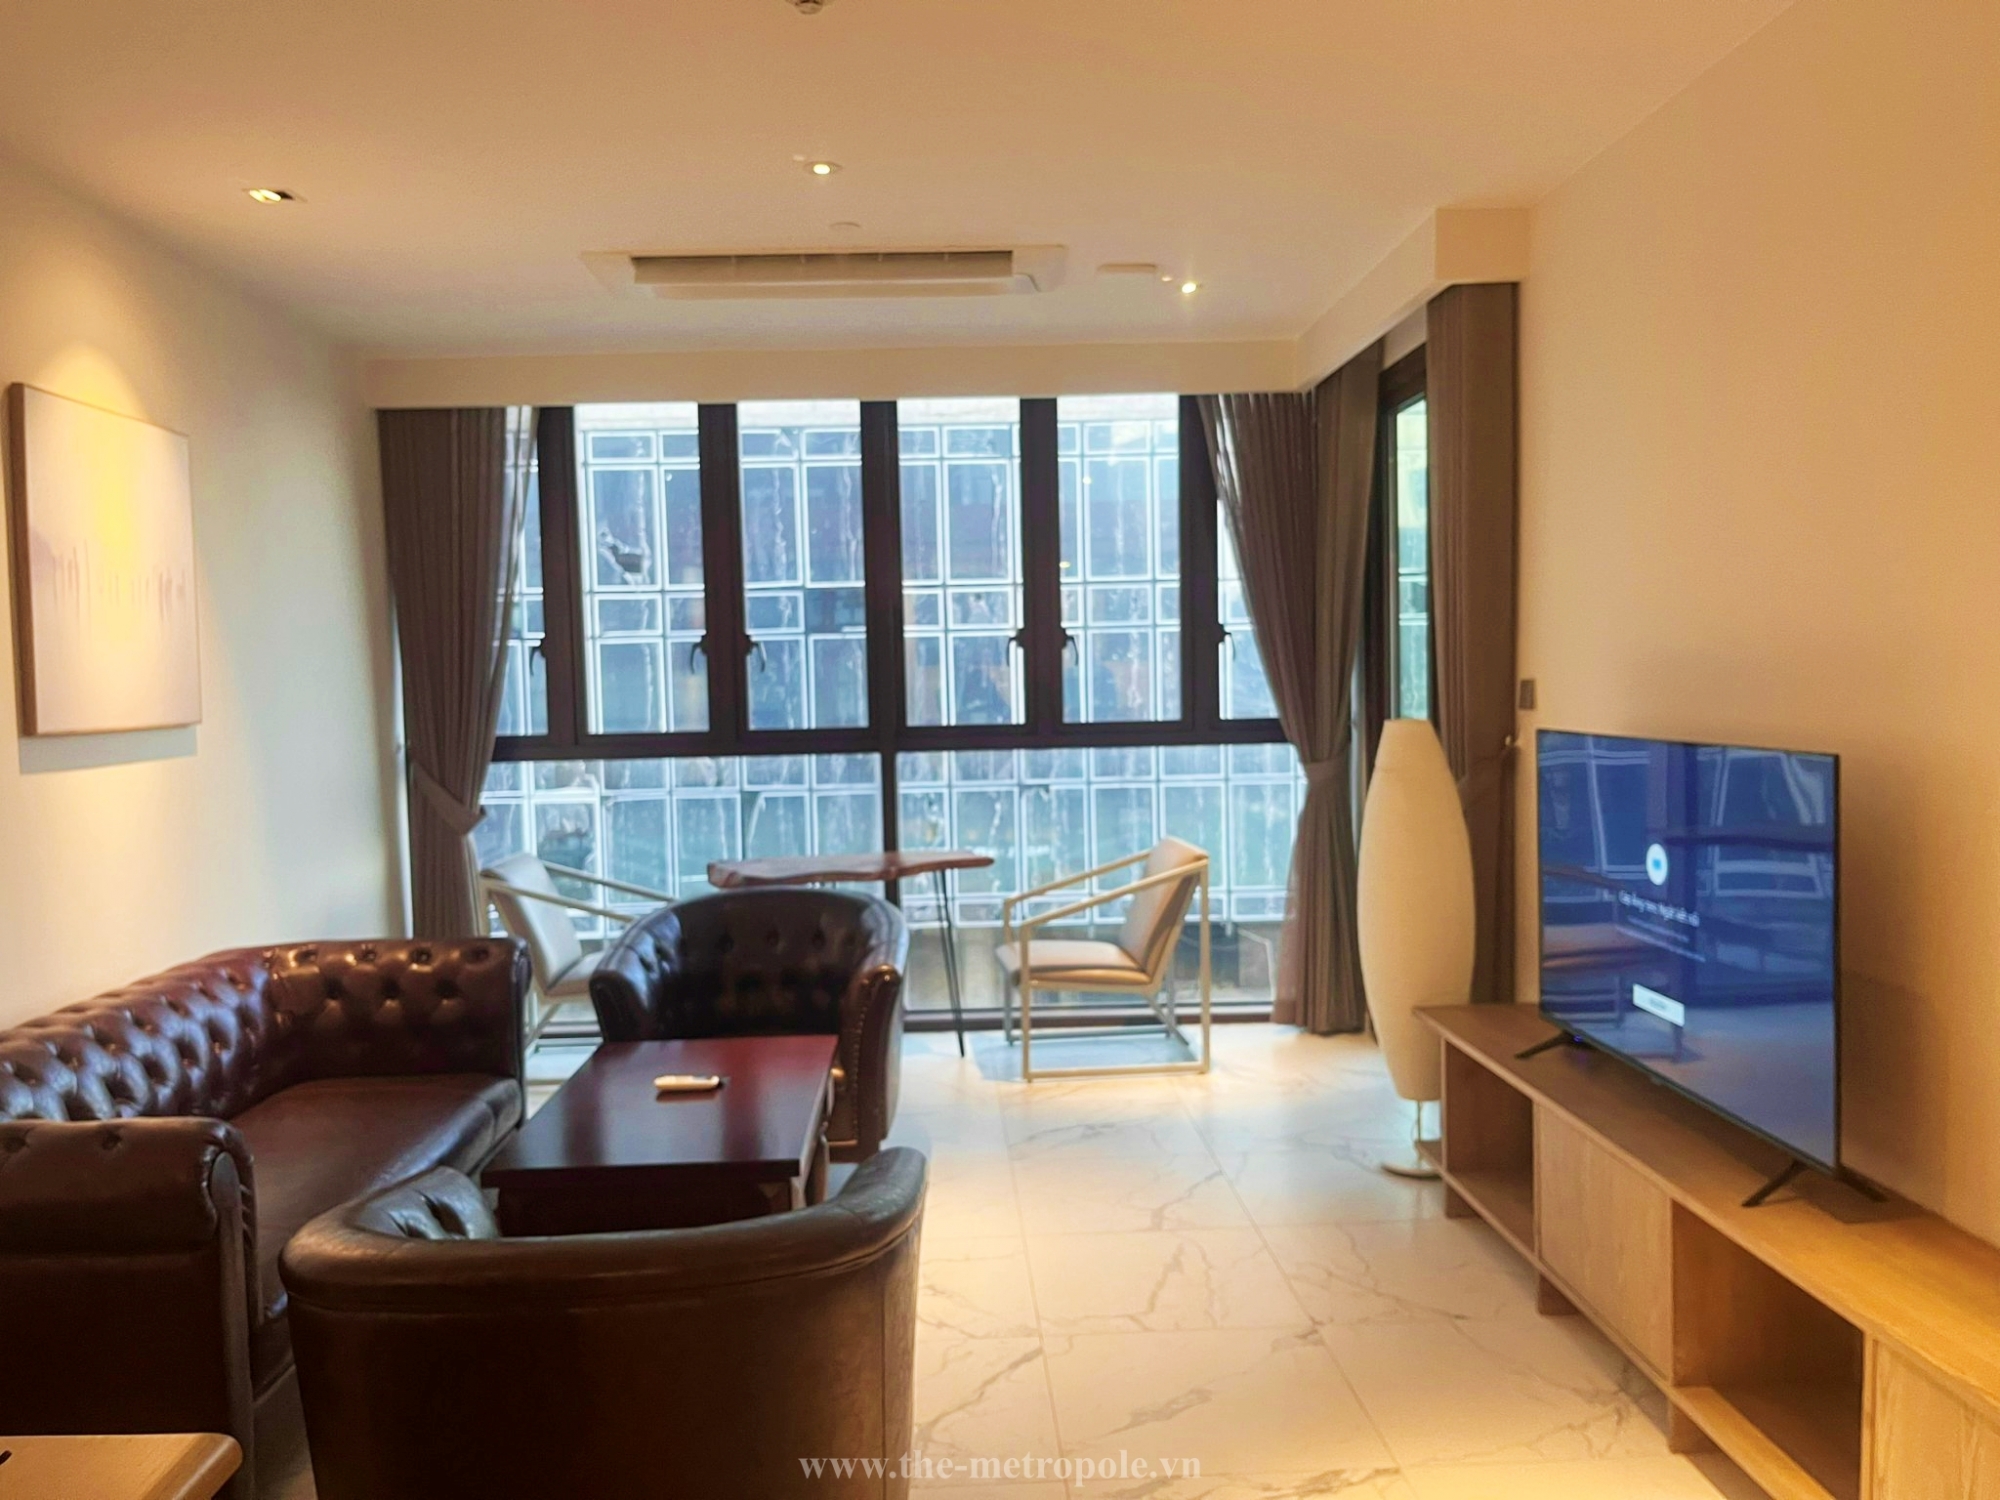 A modern 3-bedroom apartment for rent in The Metropole Thu Thiem with low rent